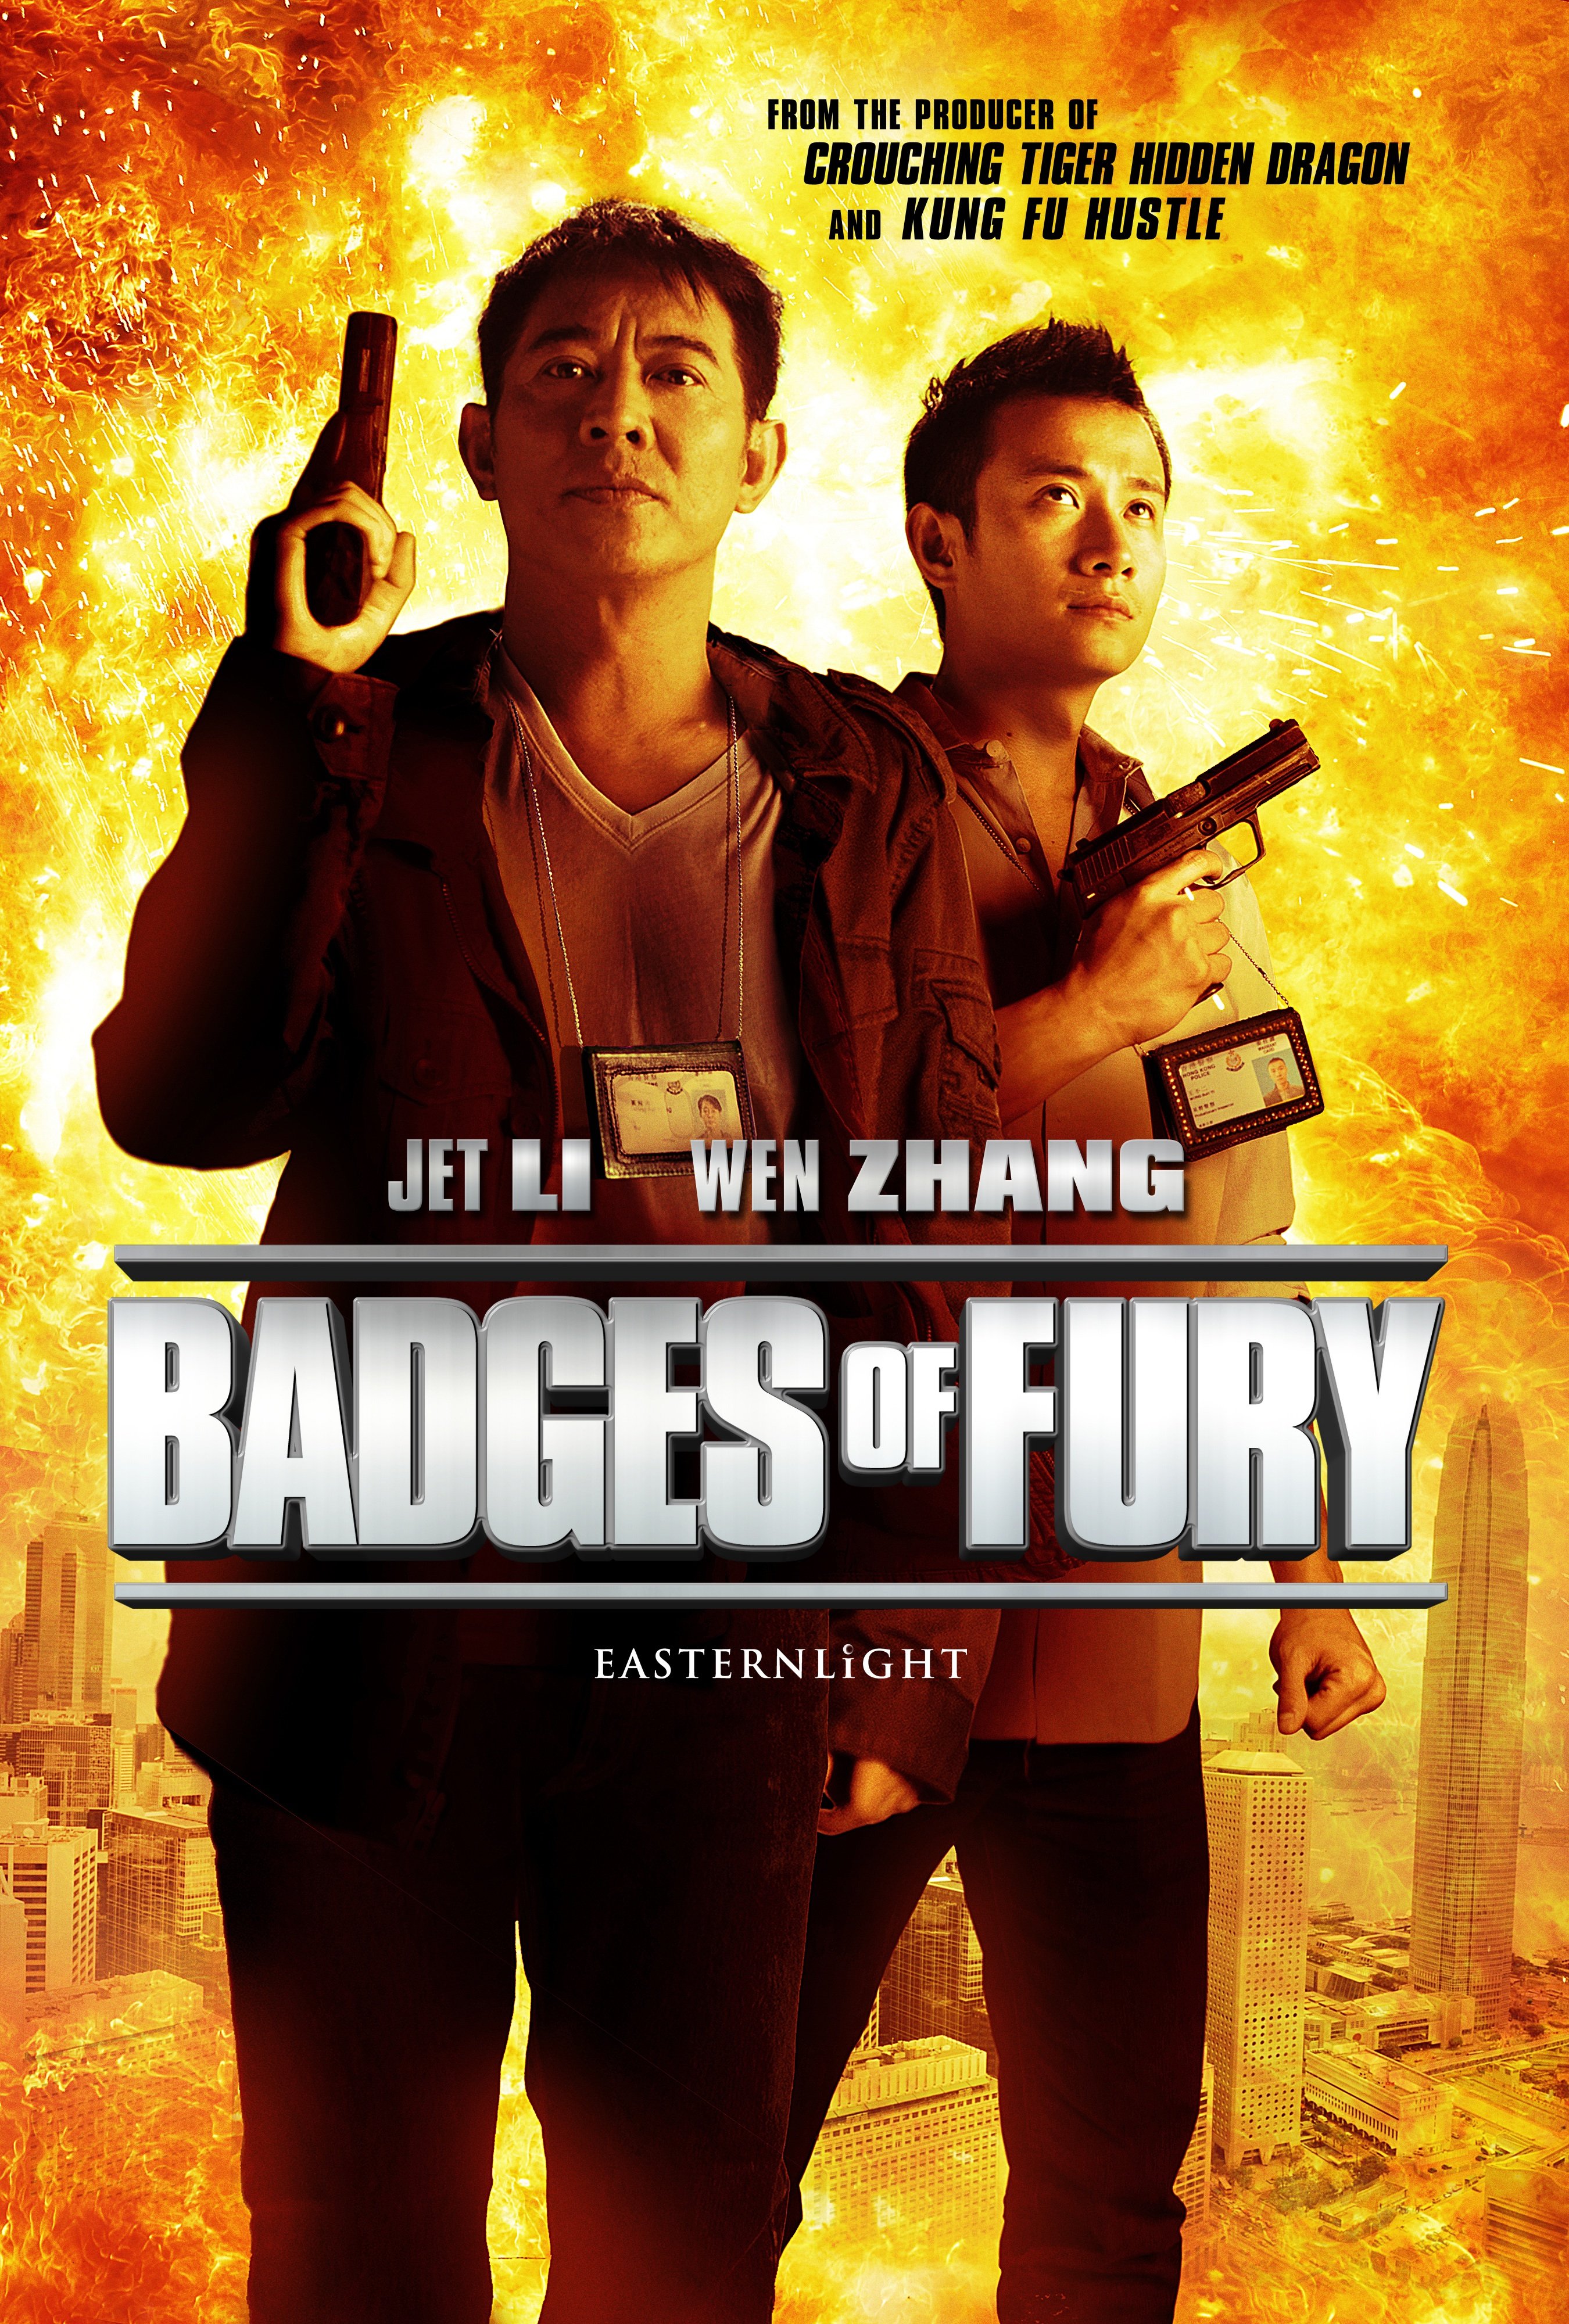 Poster of the movie Badges of Fury